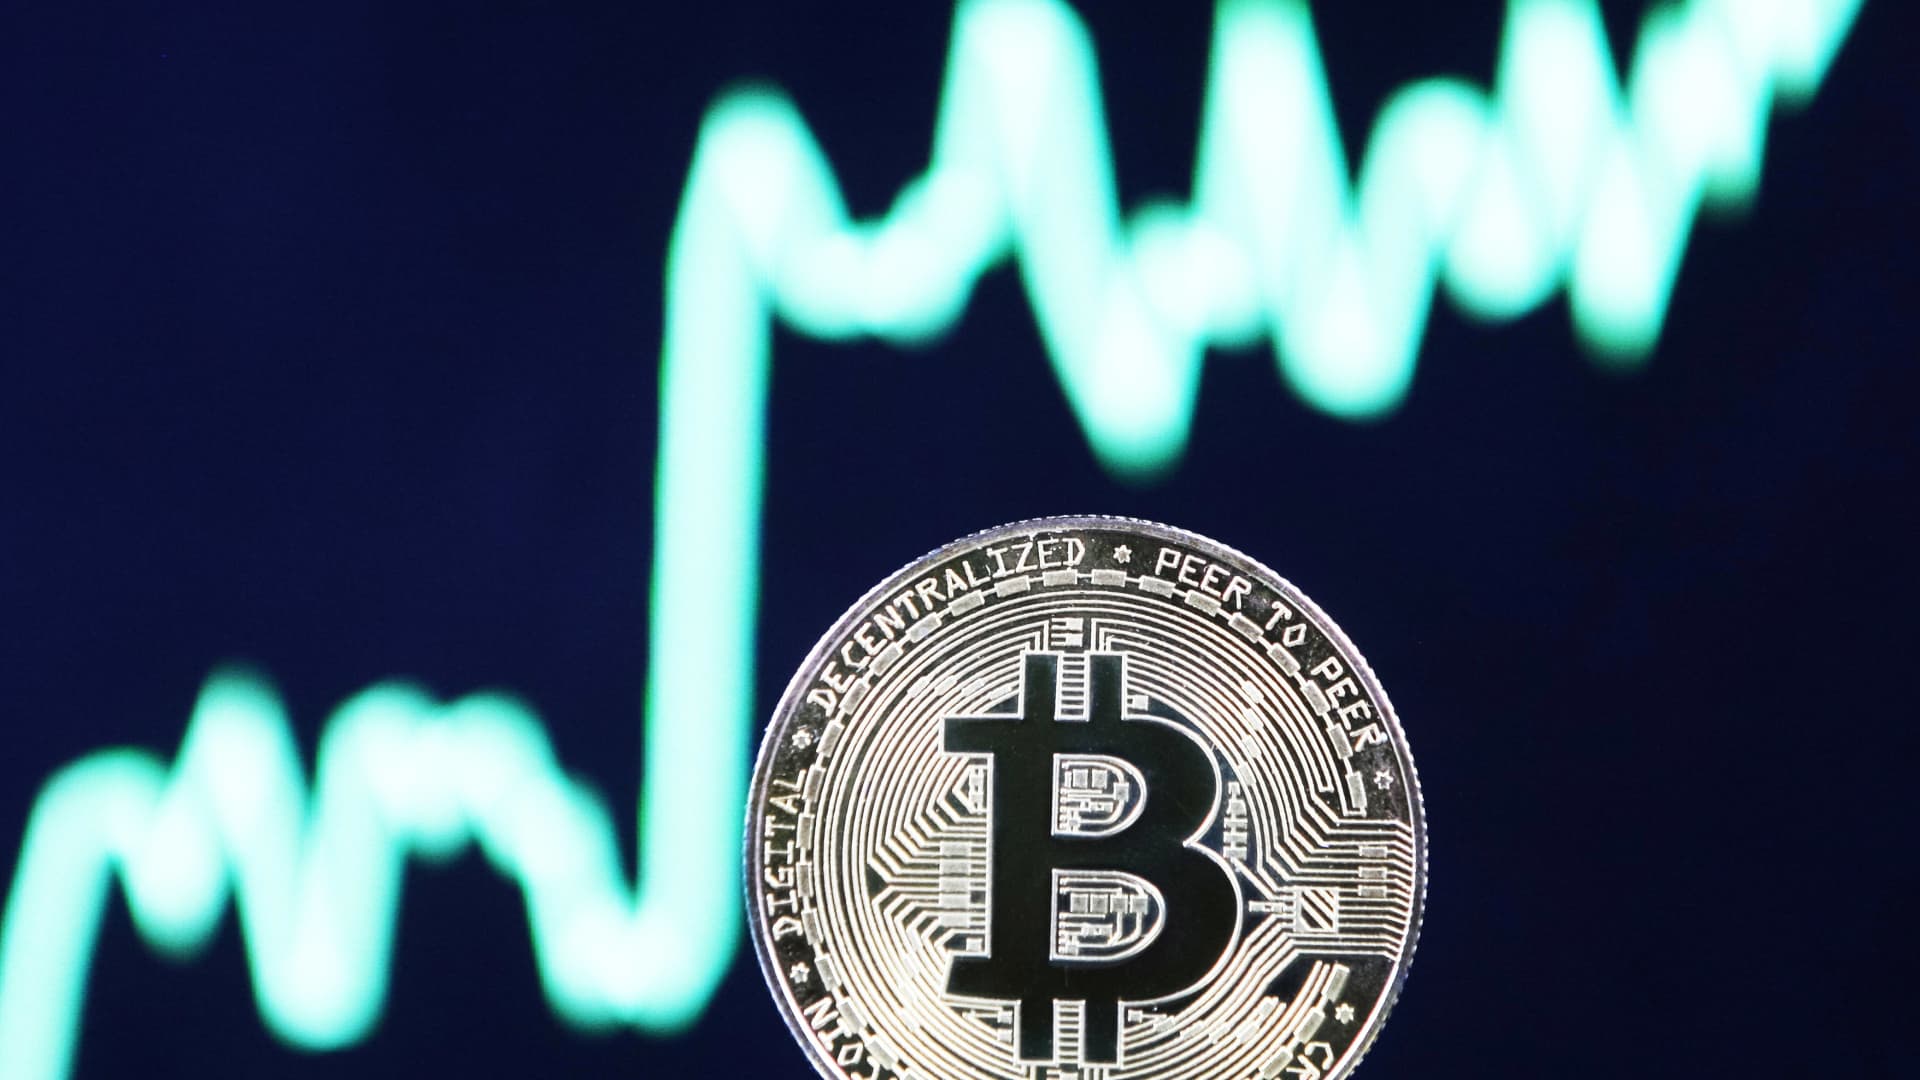 Bitcoin could hit $100,000 within a year, crypto firm's CEO predicts 